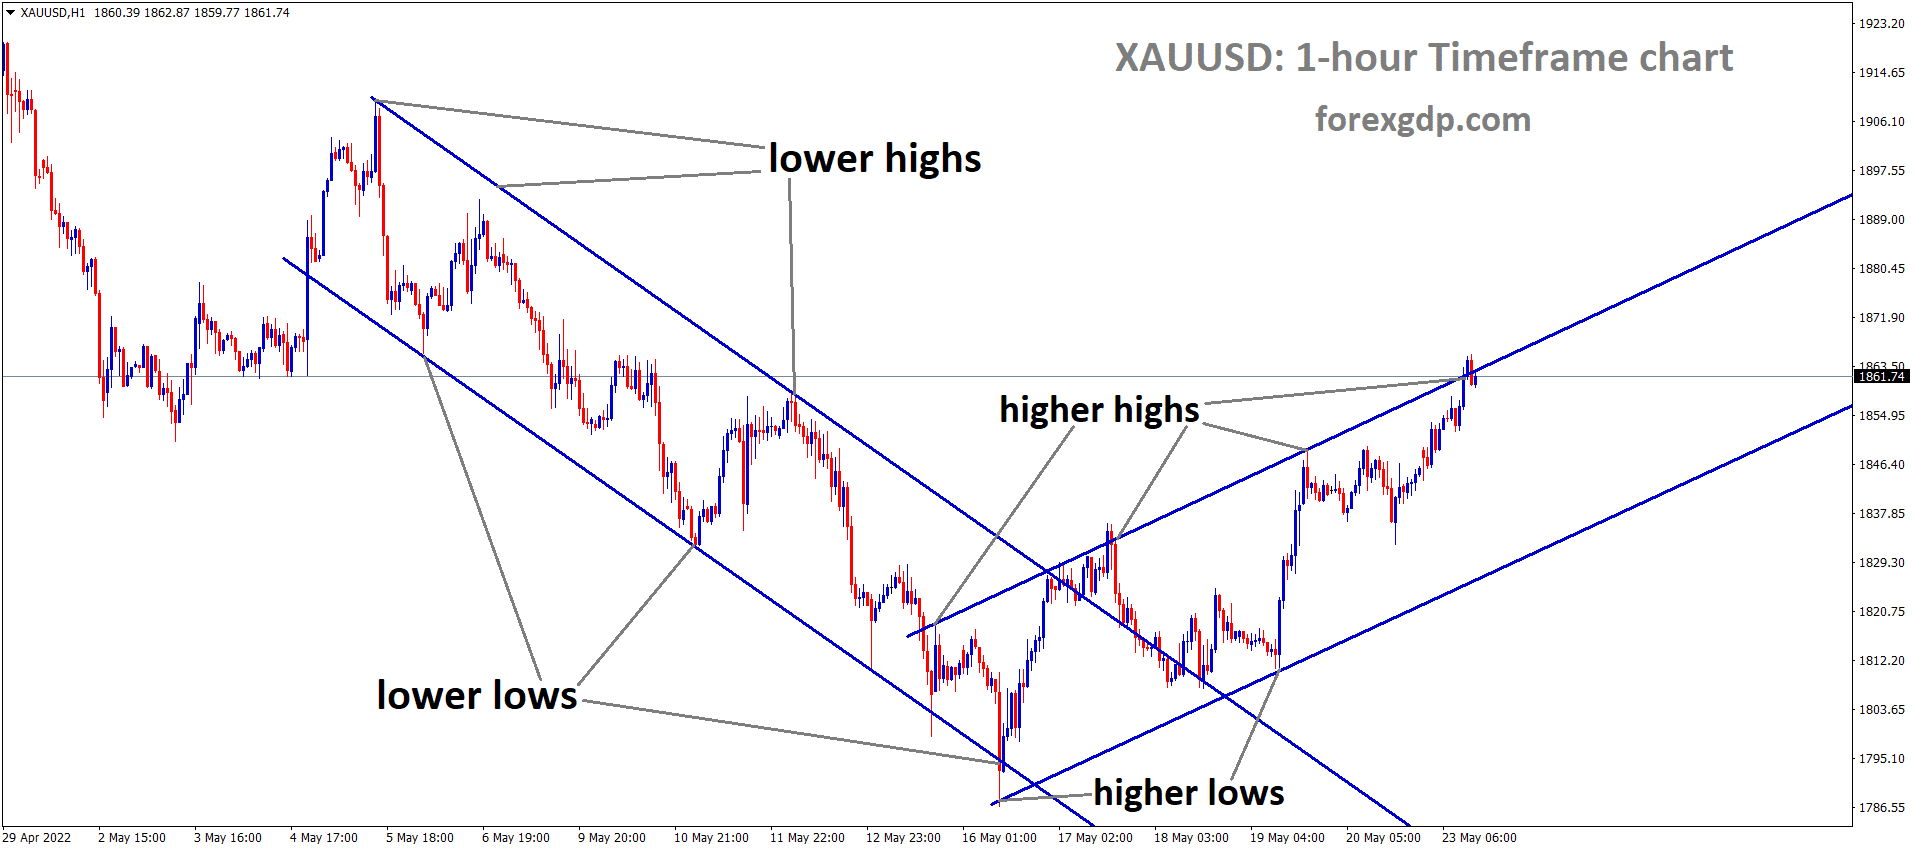 XAUUSD H1 Time Frame Analysis Market is moving in an Ascending channel and the Market has reached the higher high area of the channel